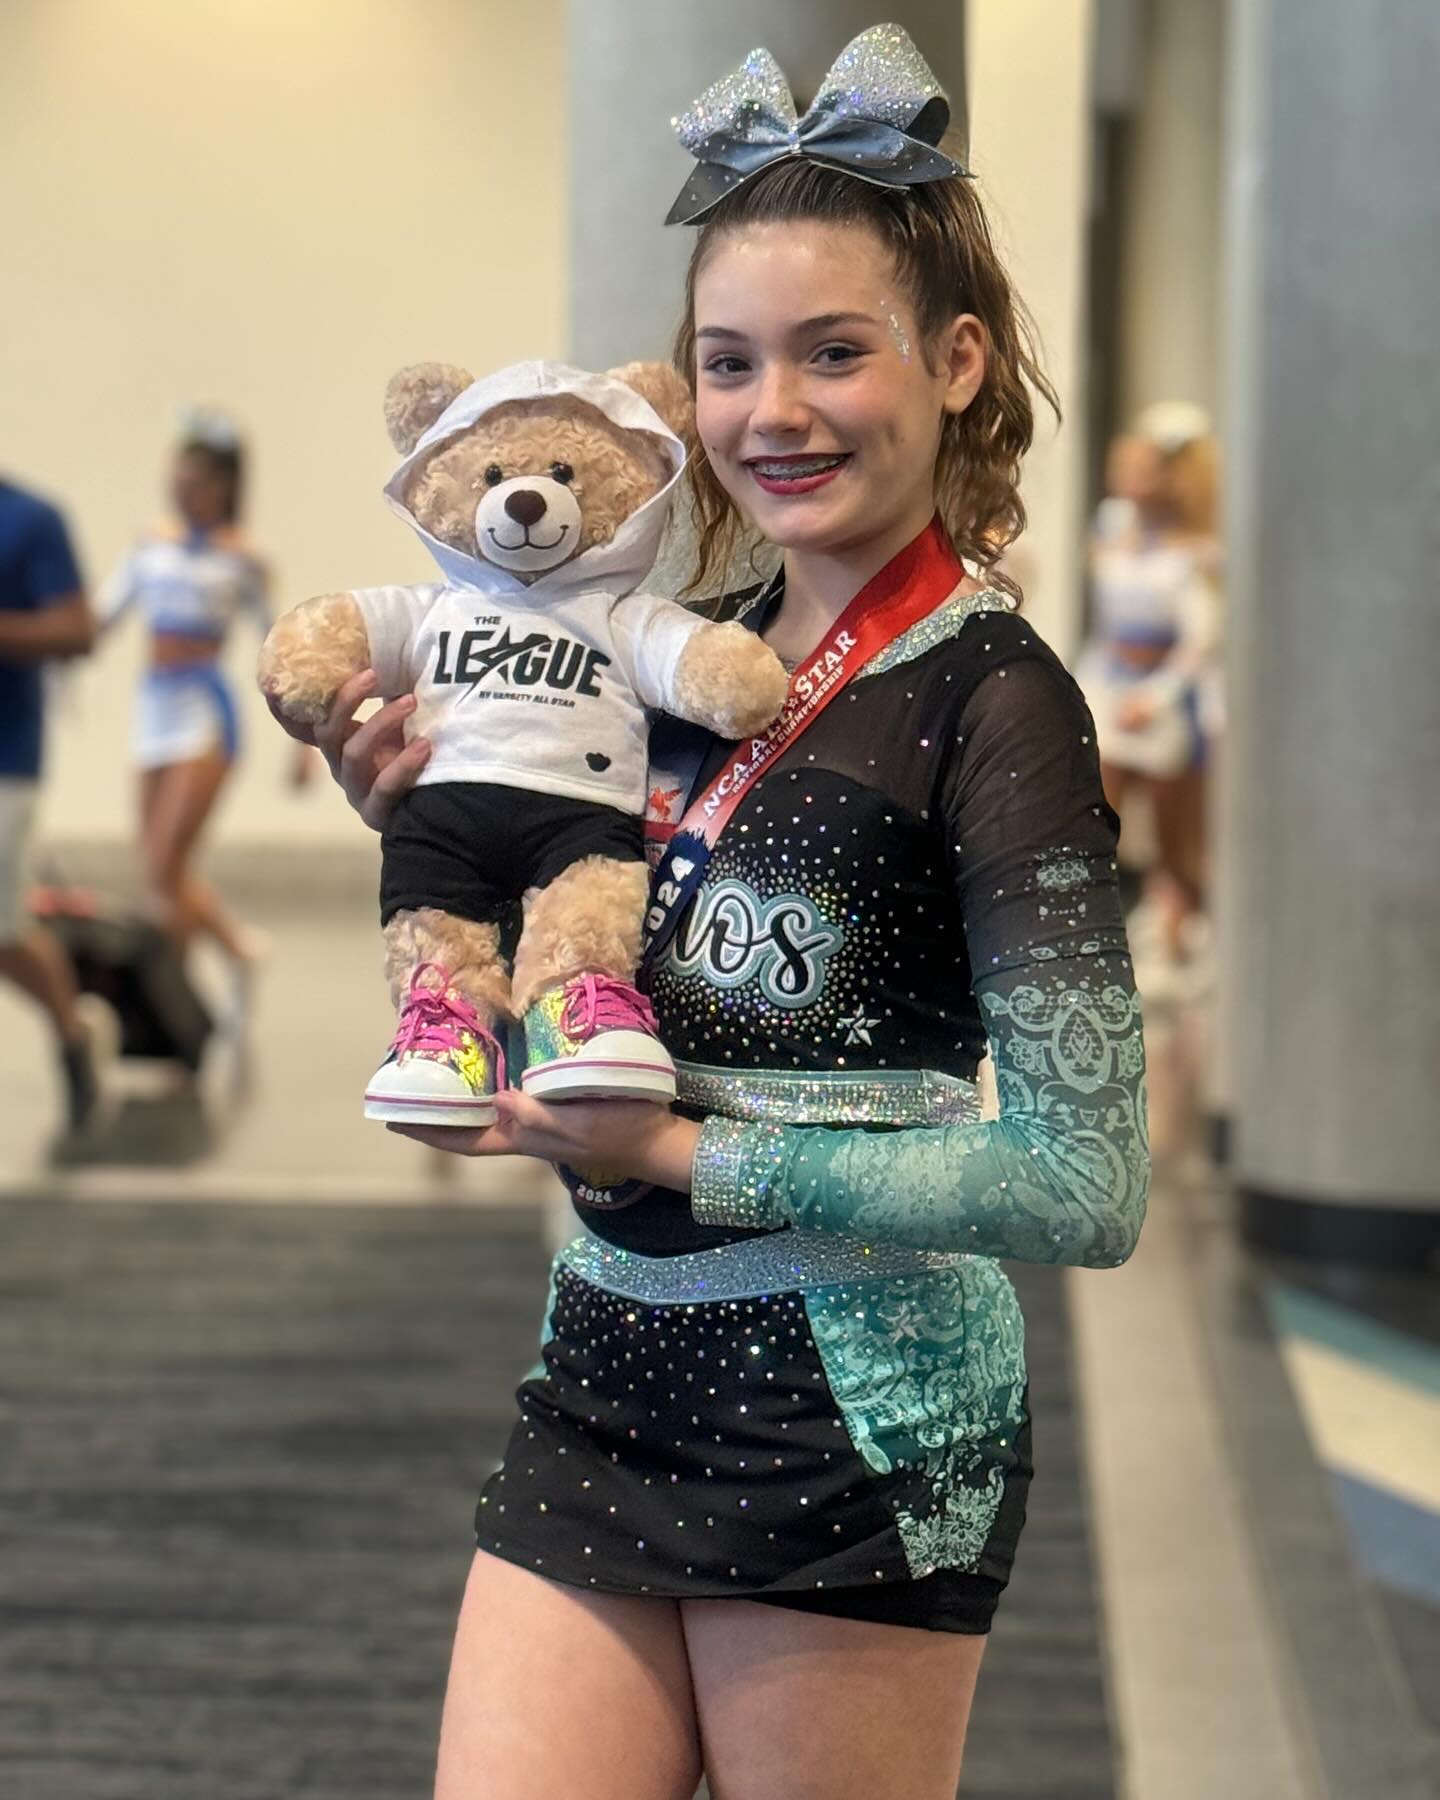 Ended the Dallas weekend with a new buddy. I love my baby girl so much and we are all so proud of you and the rest of the team. The growth we all saw this weekend 😍💕

#cheer #cheerleading #tumble #stunt #competition #team #nca #dallas #texas #chaos #rebel #u16 #beautiful #baby #daughter #buildabear #dimples #braces